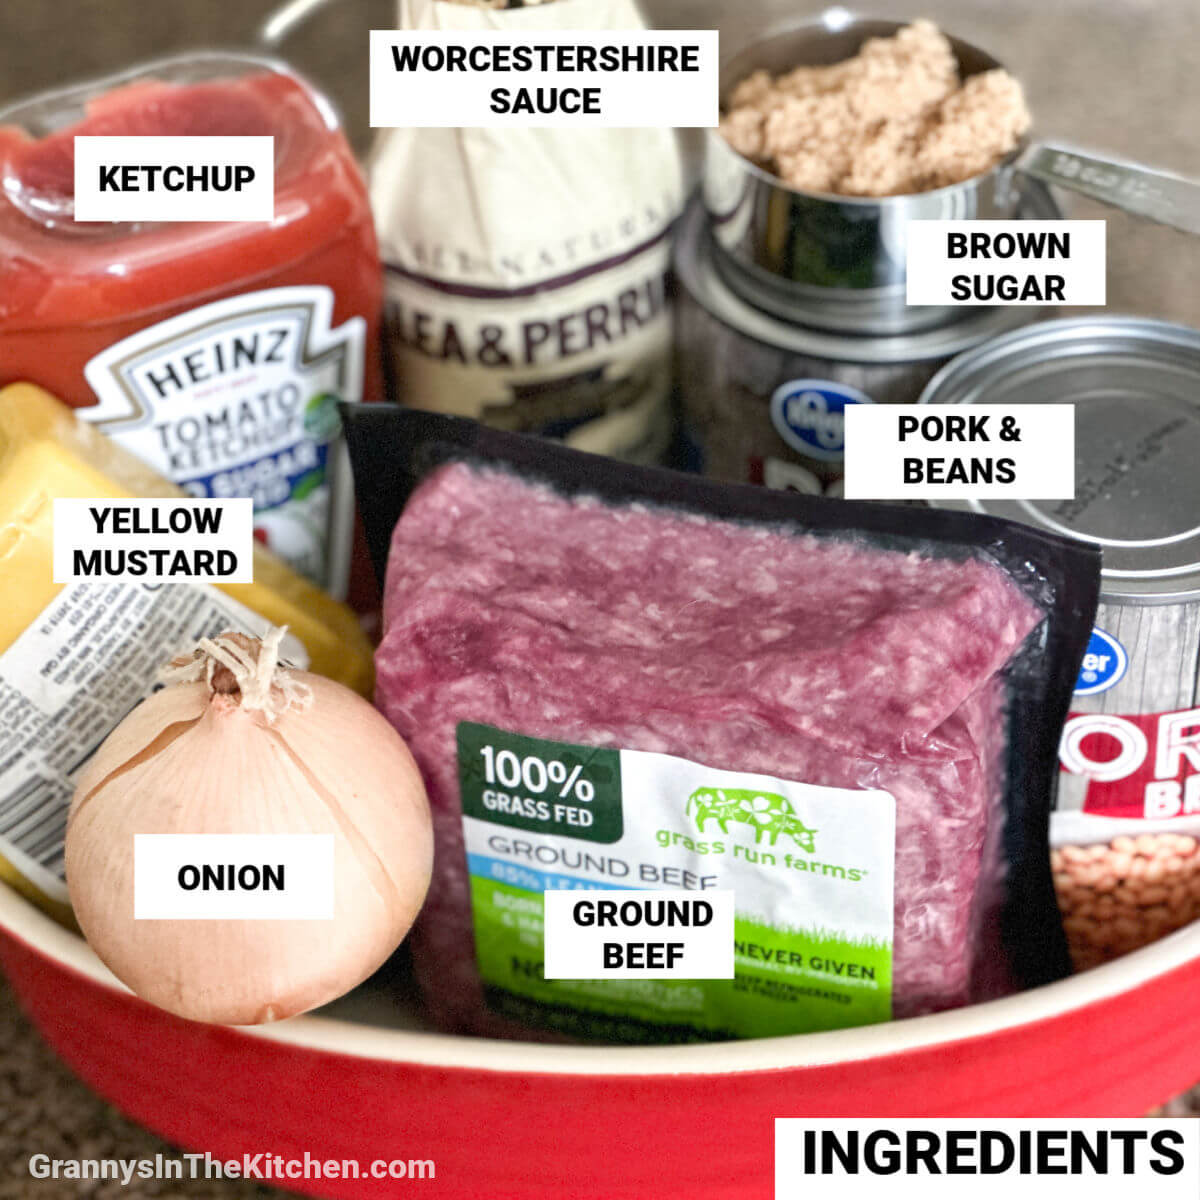 ingredients needed to make Southern style baked beans, with text labels